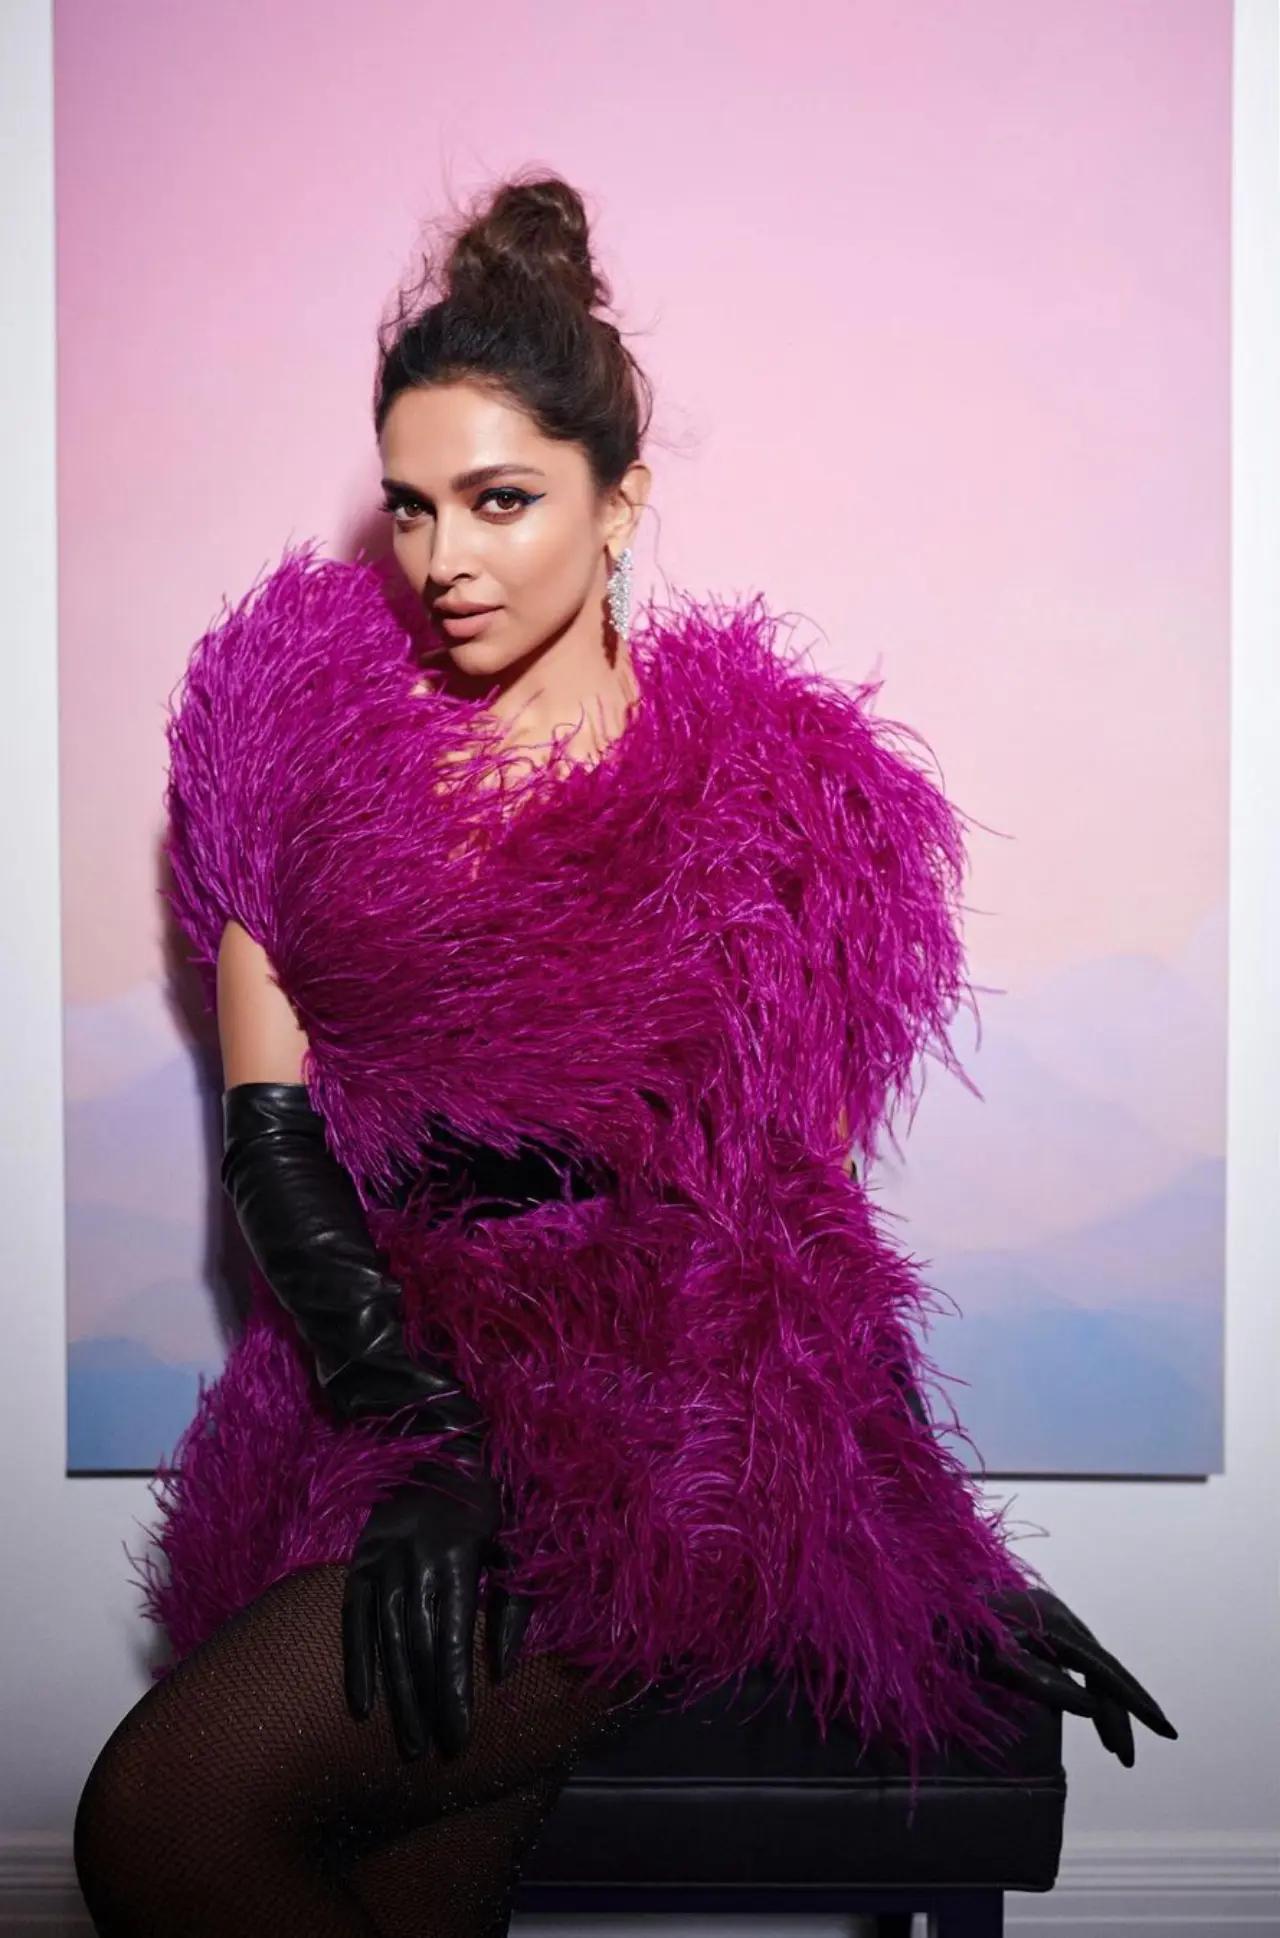 Deepika completed her outfit with Cartier jewelry, tying her silky hair into a casual bun. A touch of nude lipstick, dewy makeup, bold eye shadow, and a winged liner added to her glamorous appearance.